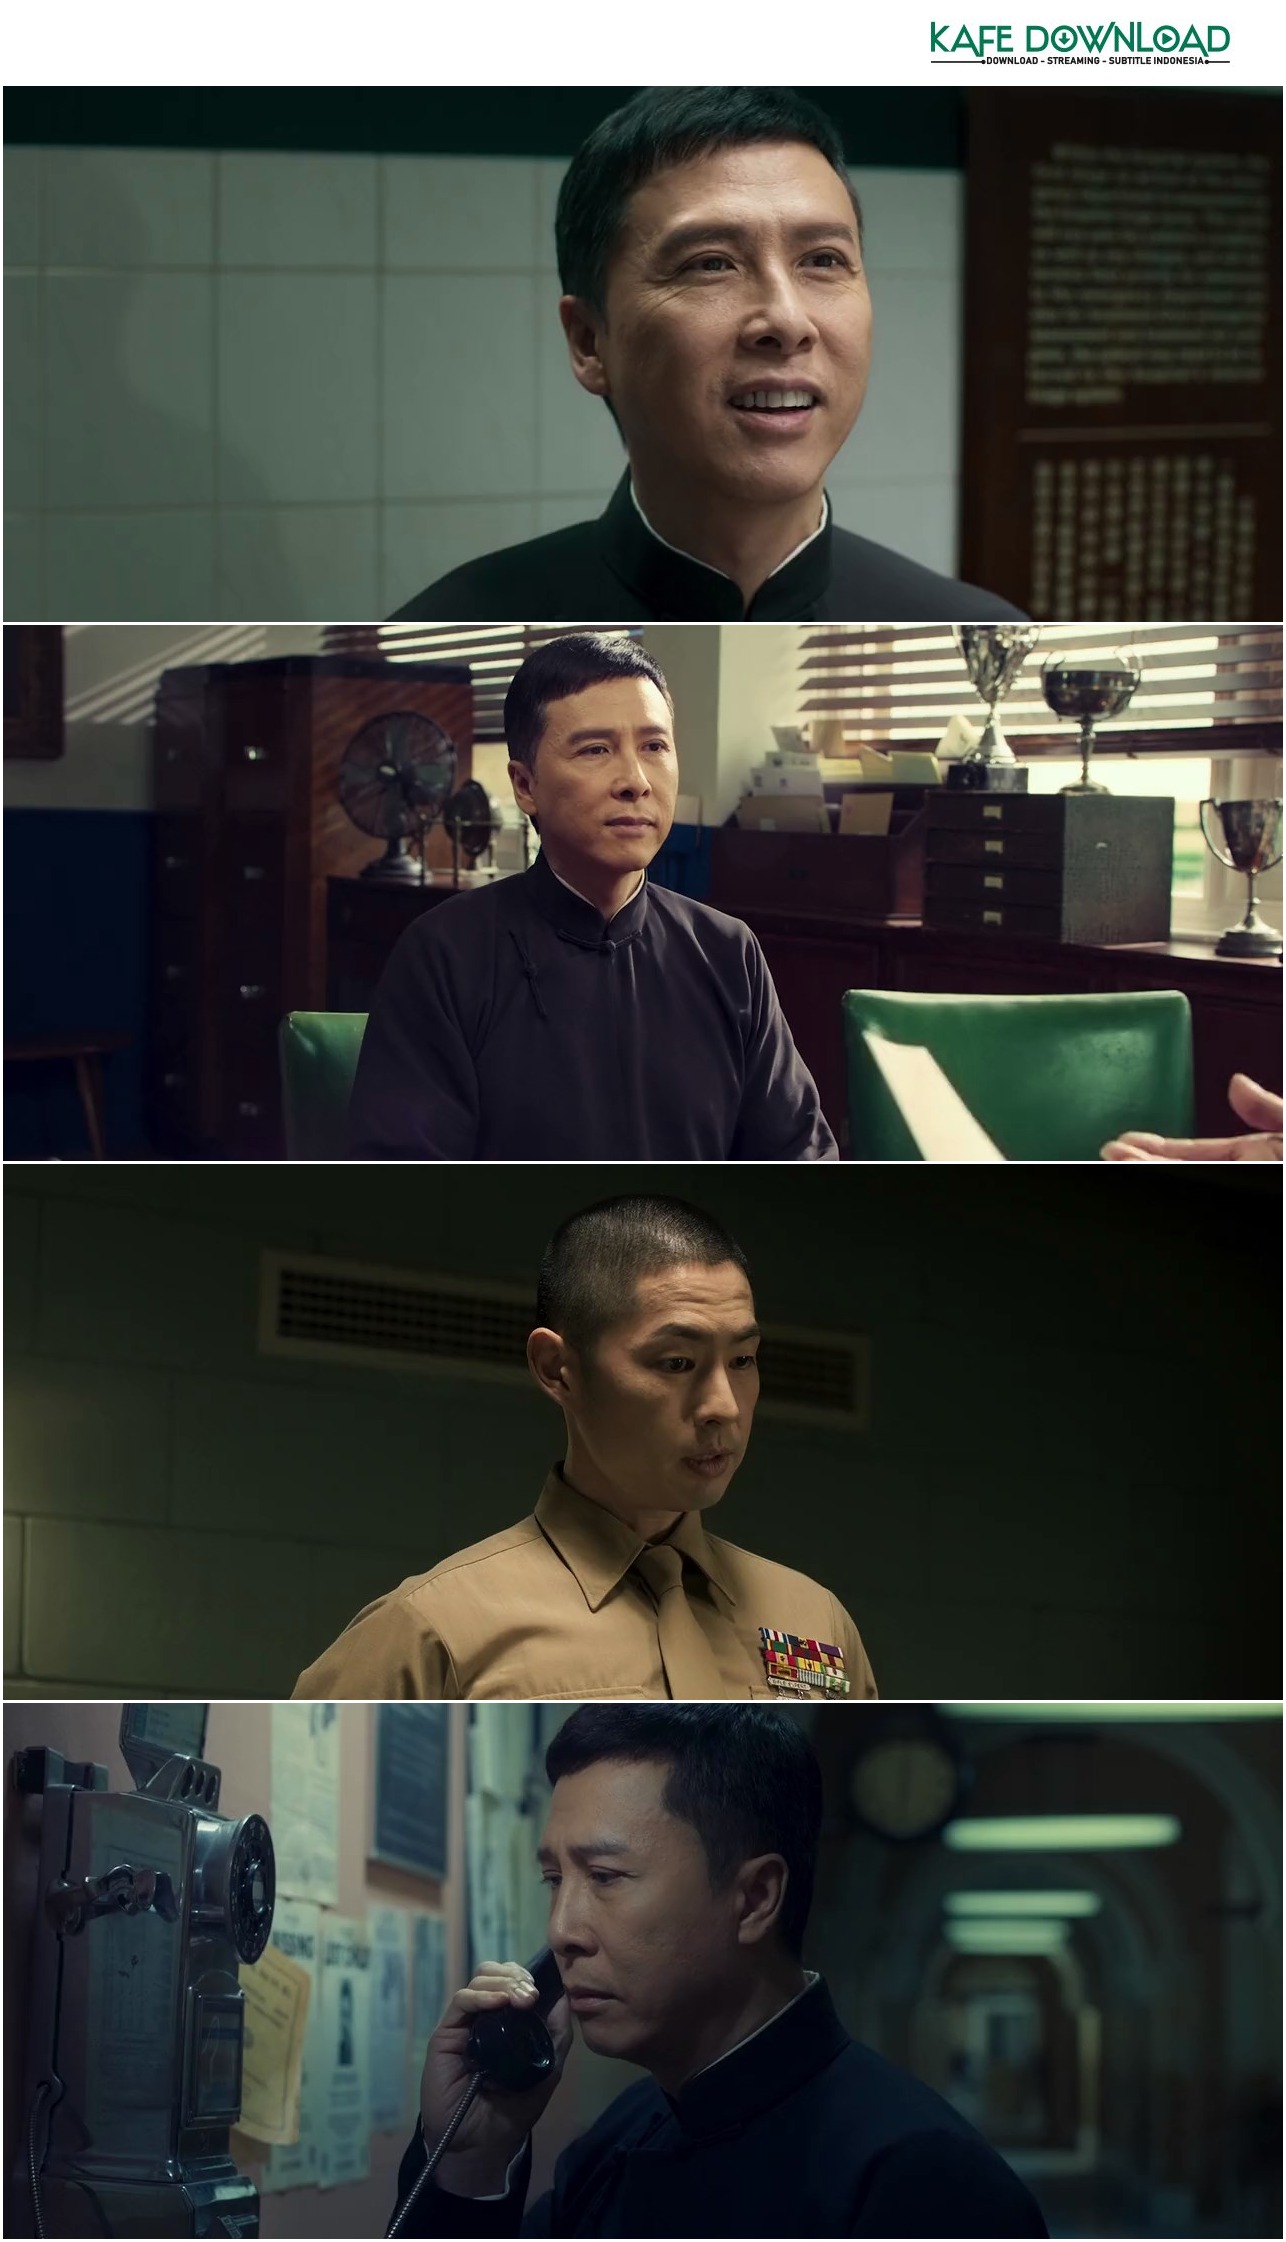 Nonton Film Ip Man 4: The Finale (2019) BluRay - Subtitle Indonesia, Download Movie, Streaming ...